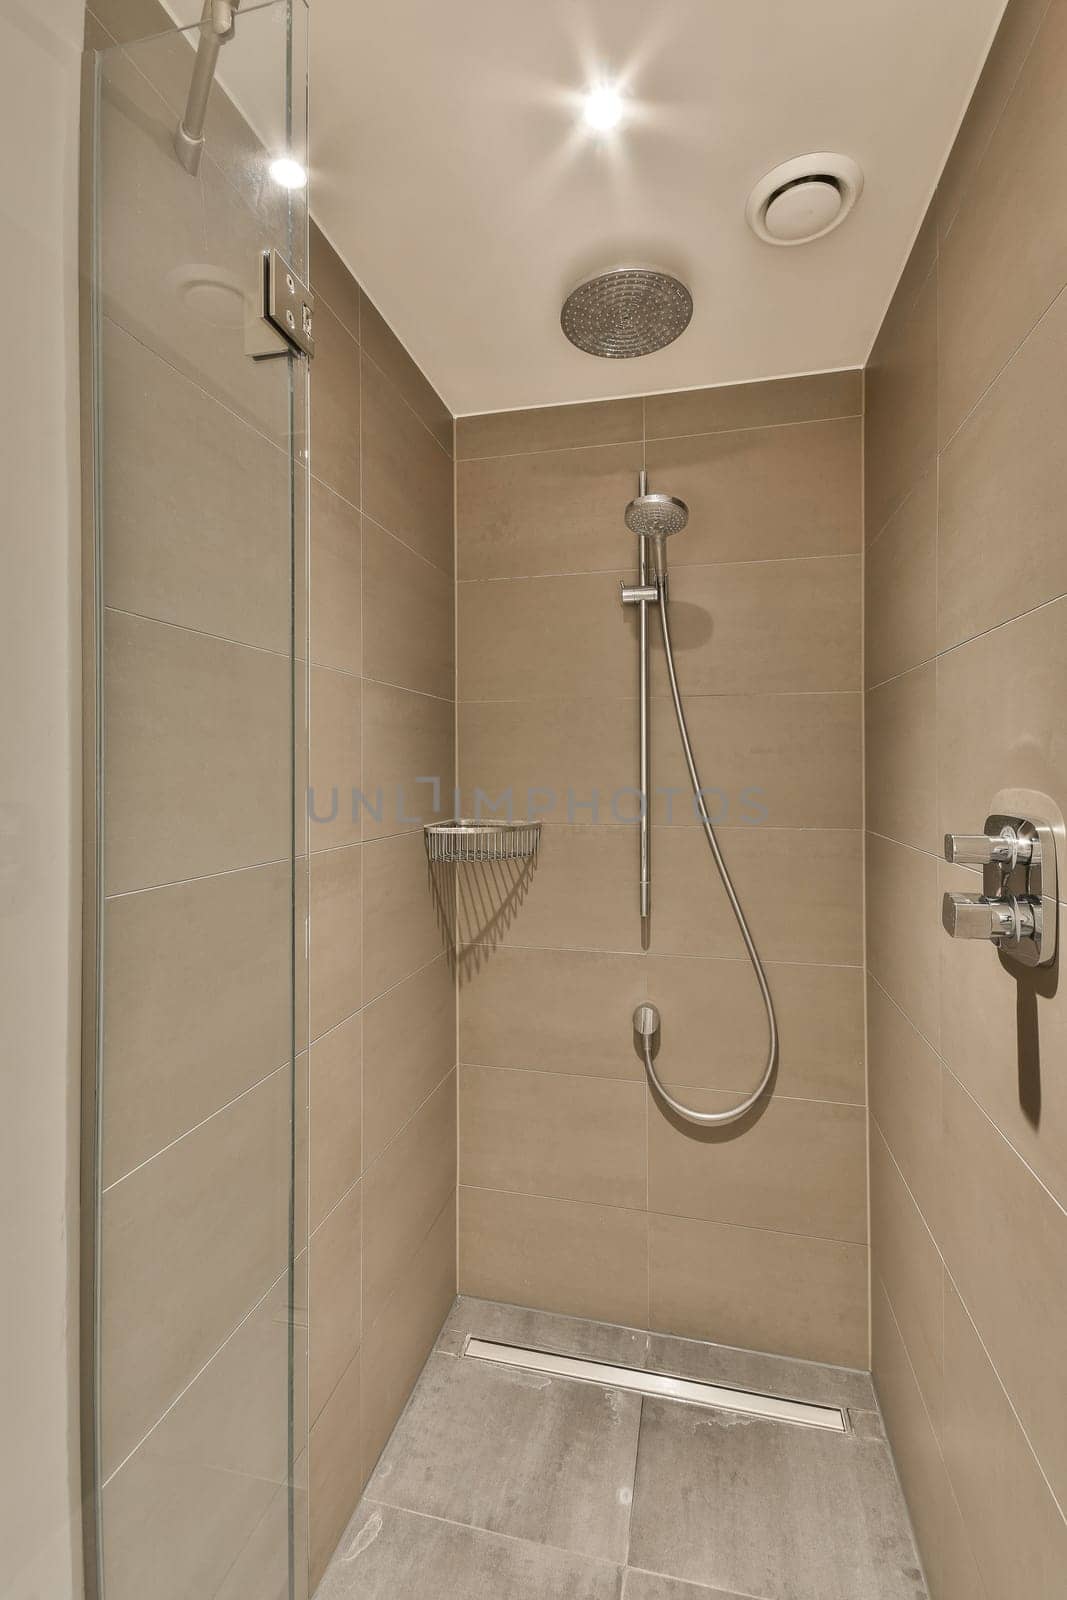 a walk in shower that is very clean and ready to be used for the bathroom reurrectionment